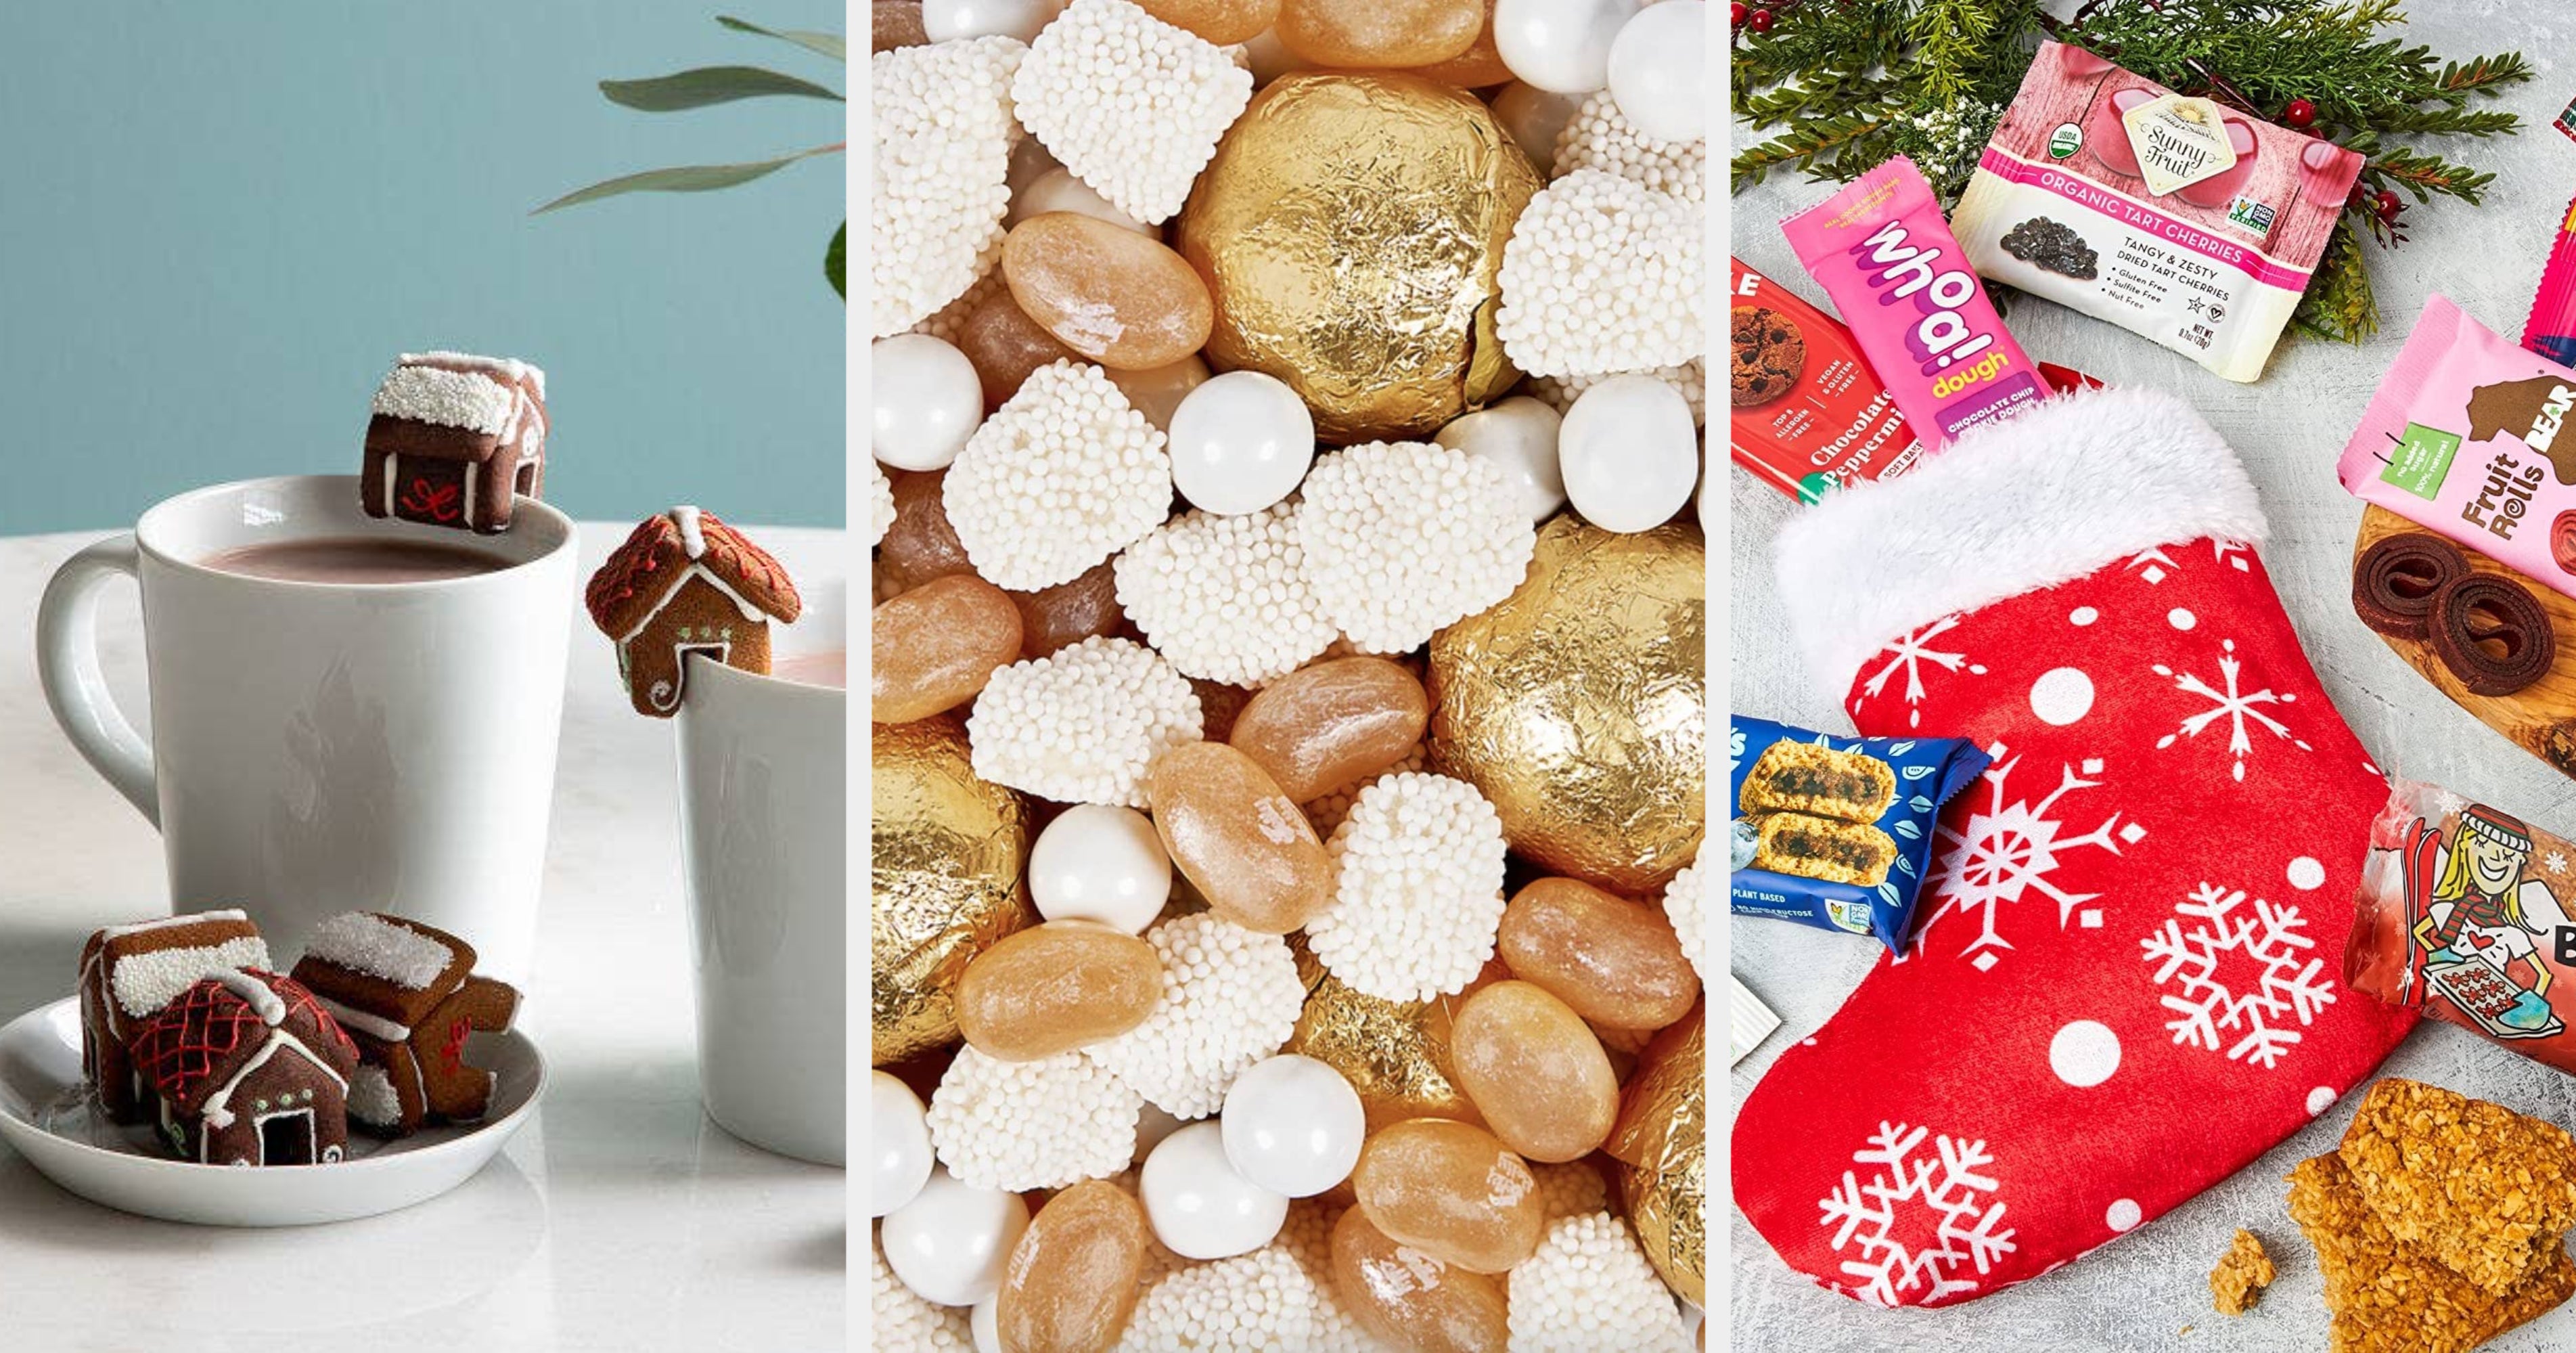 Edible Stocking Stuffers for Athletes That Are Not Junk Food